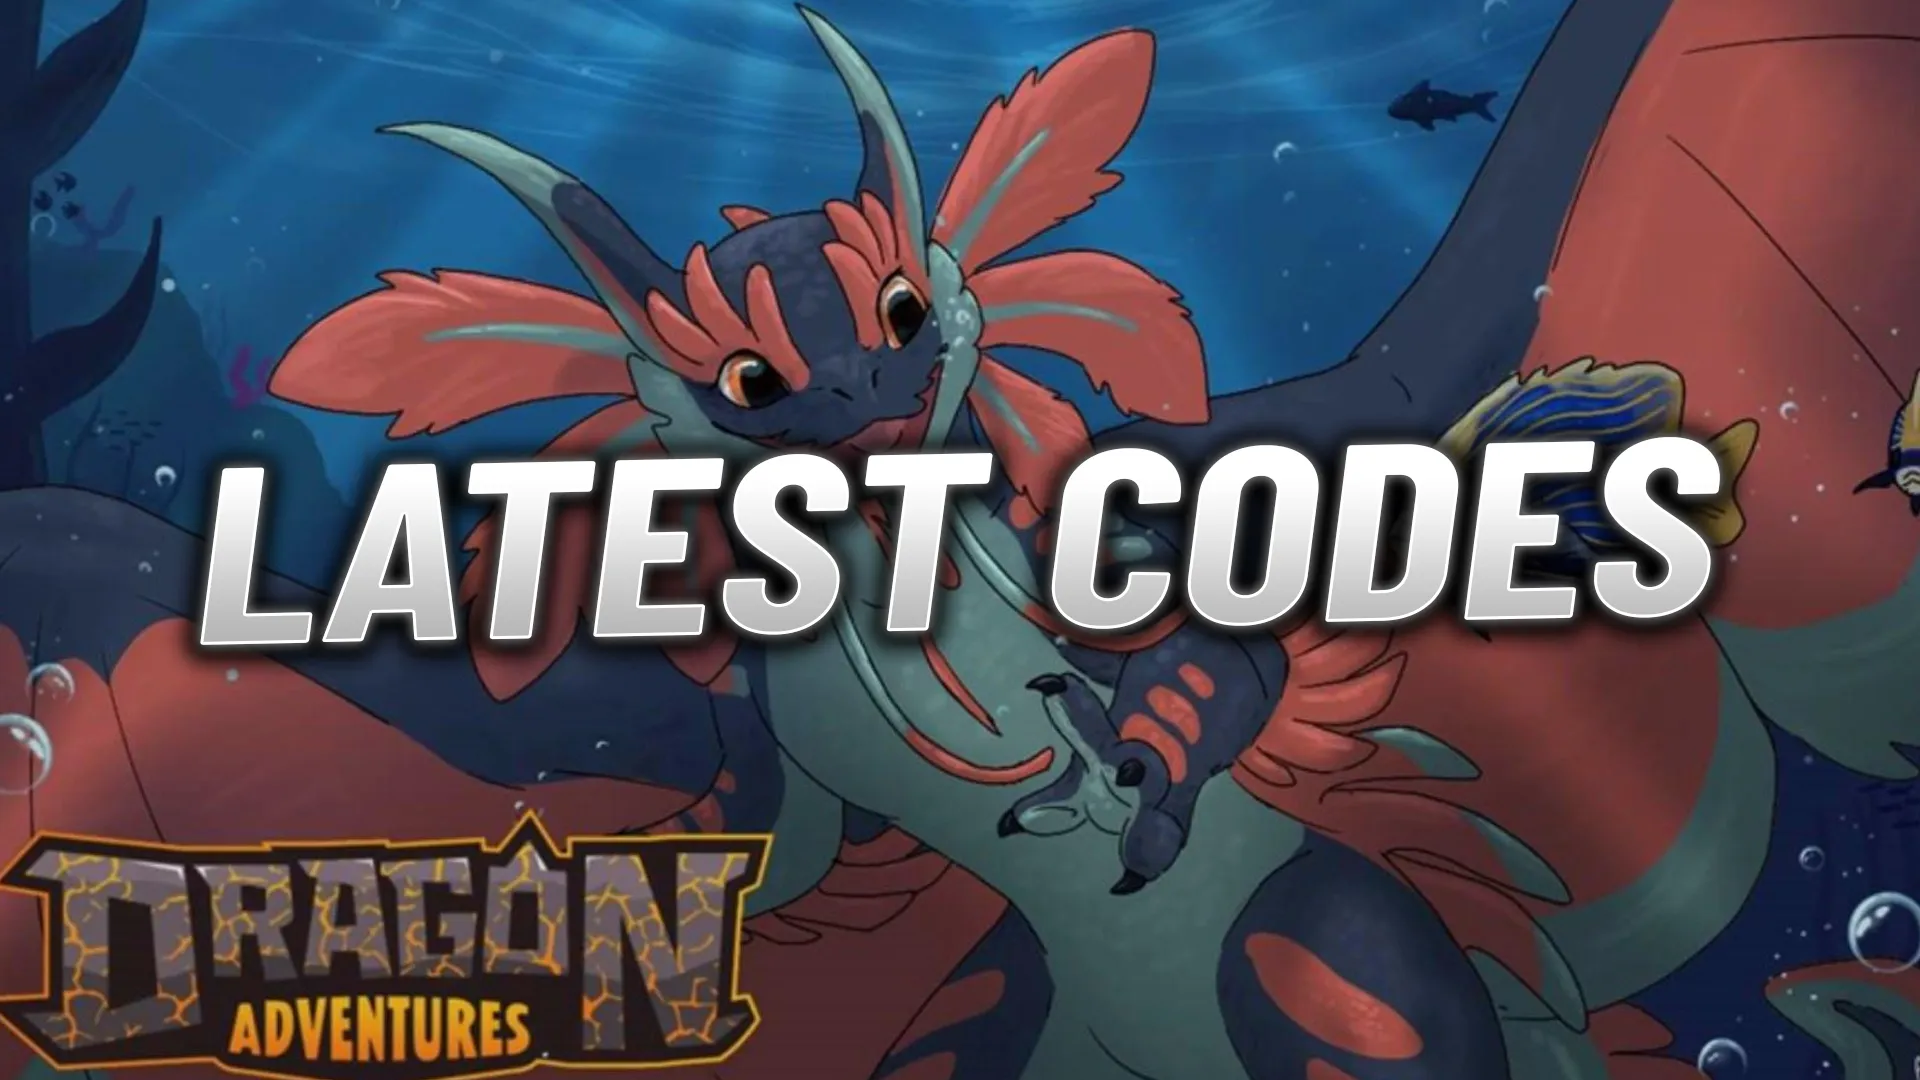 Updated] Dragon Adventures Codes: January 2023 » Gaming Guide